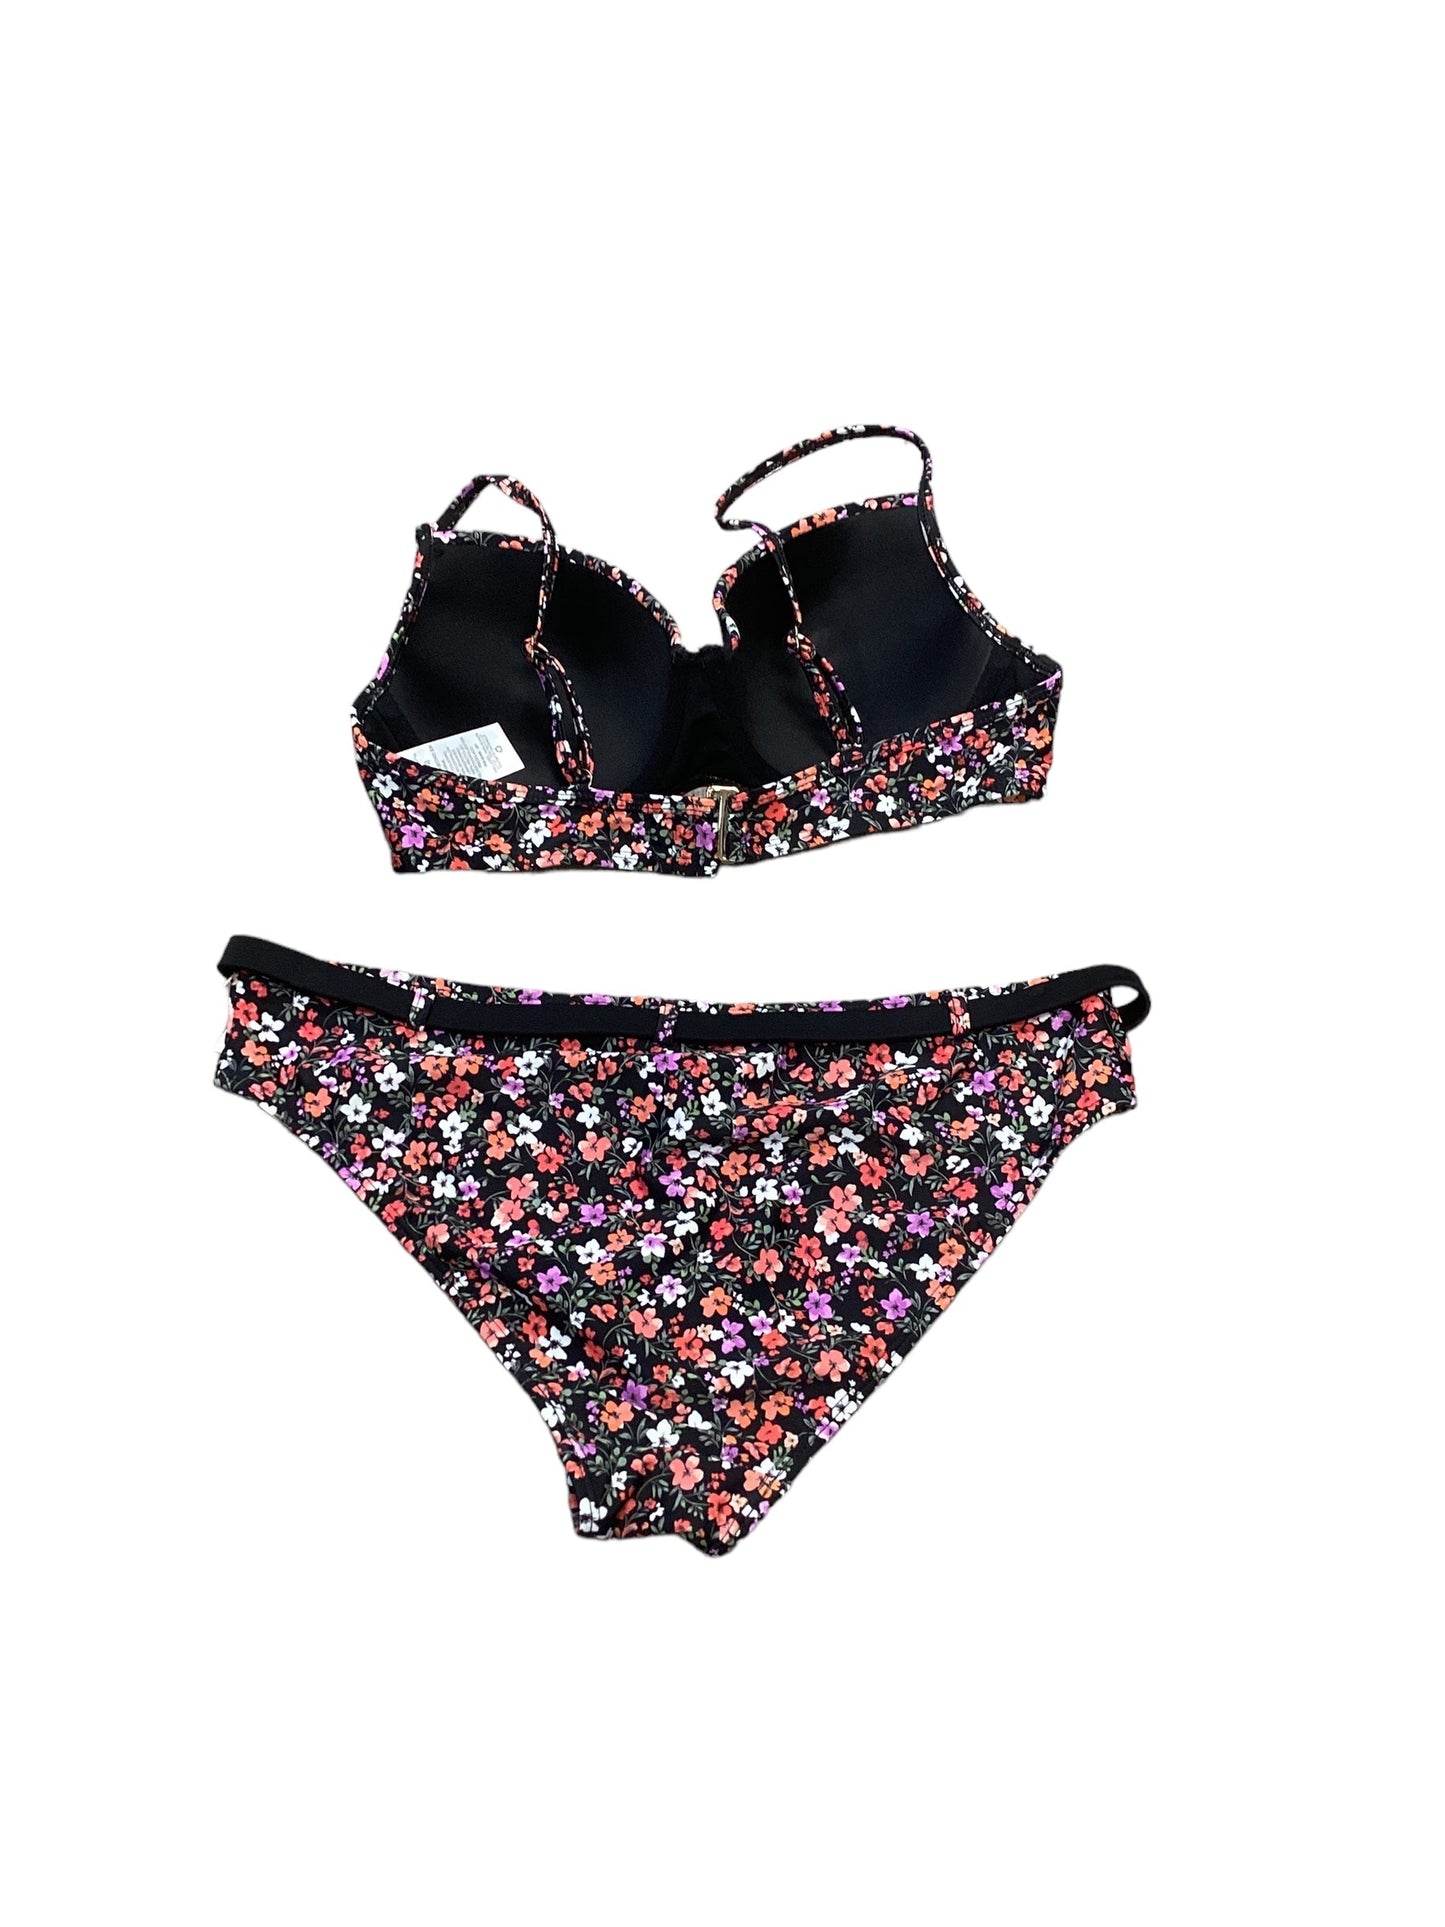 Floral Print Swimsuit 2pc Time And Tru, Size M